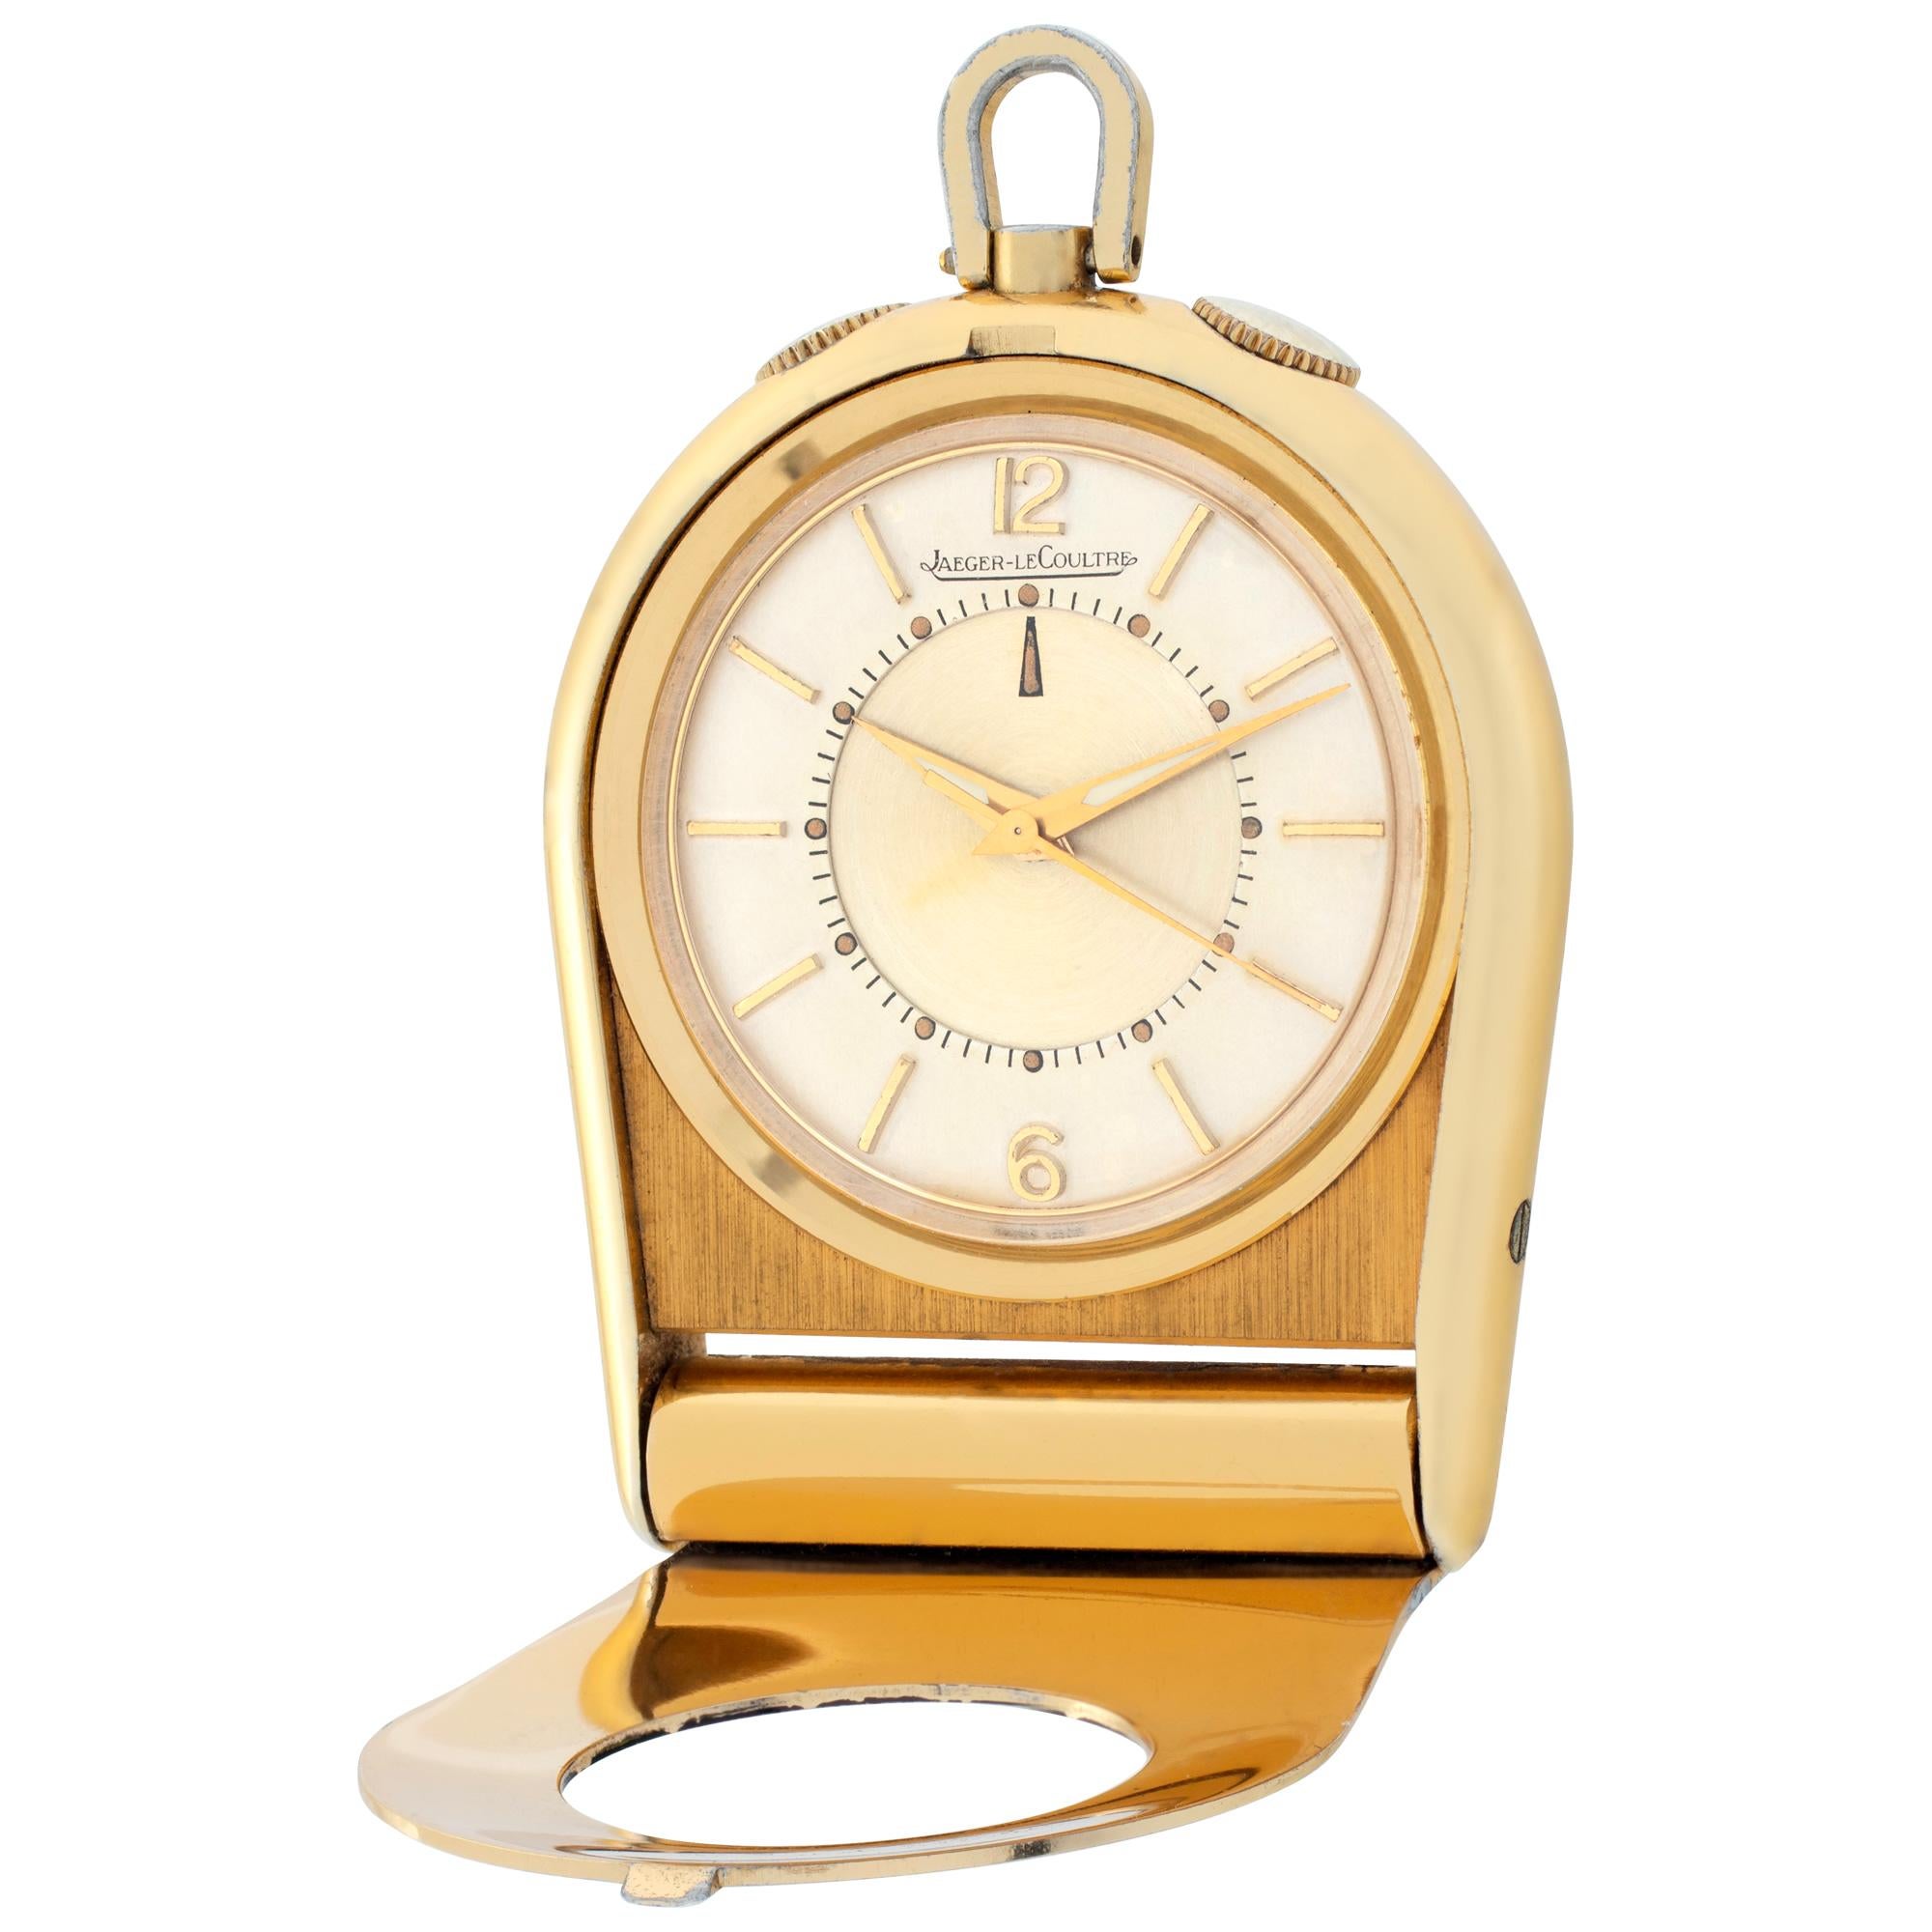 LeCoultre Gold filled Pocket watch. Manual wind with alarm. Lid folds down so you can use it as a desk alarm clock. Fine Pre-owned LeCoultre Watch. Certified preowned Vintage LeCoultre pocket watch watch. This LeCoultre watch has a Round caseback